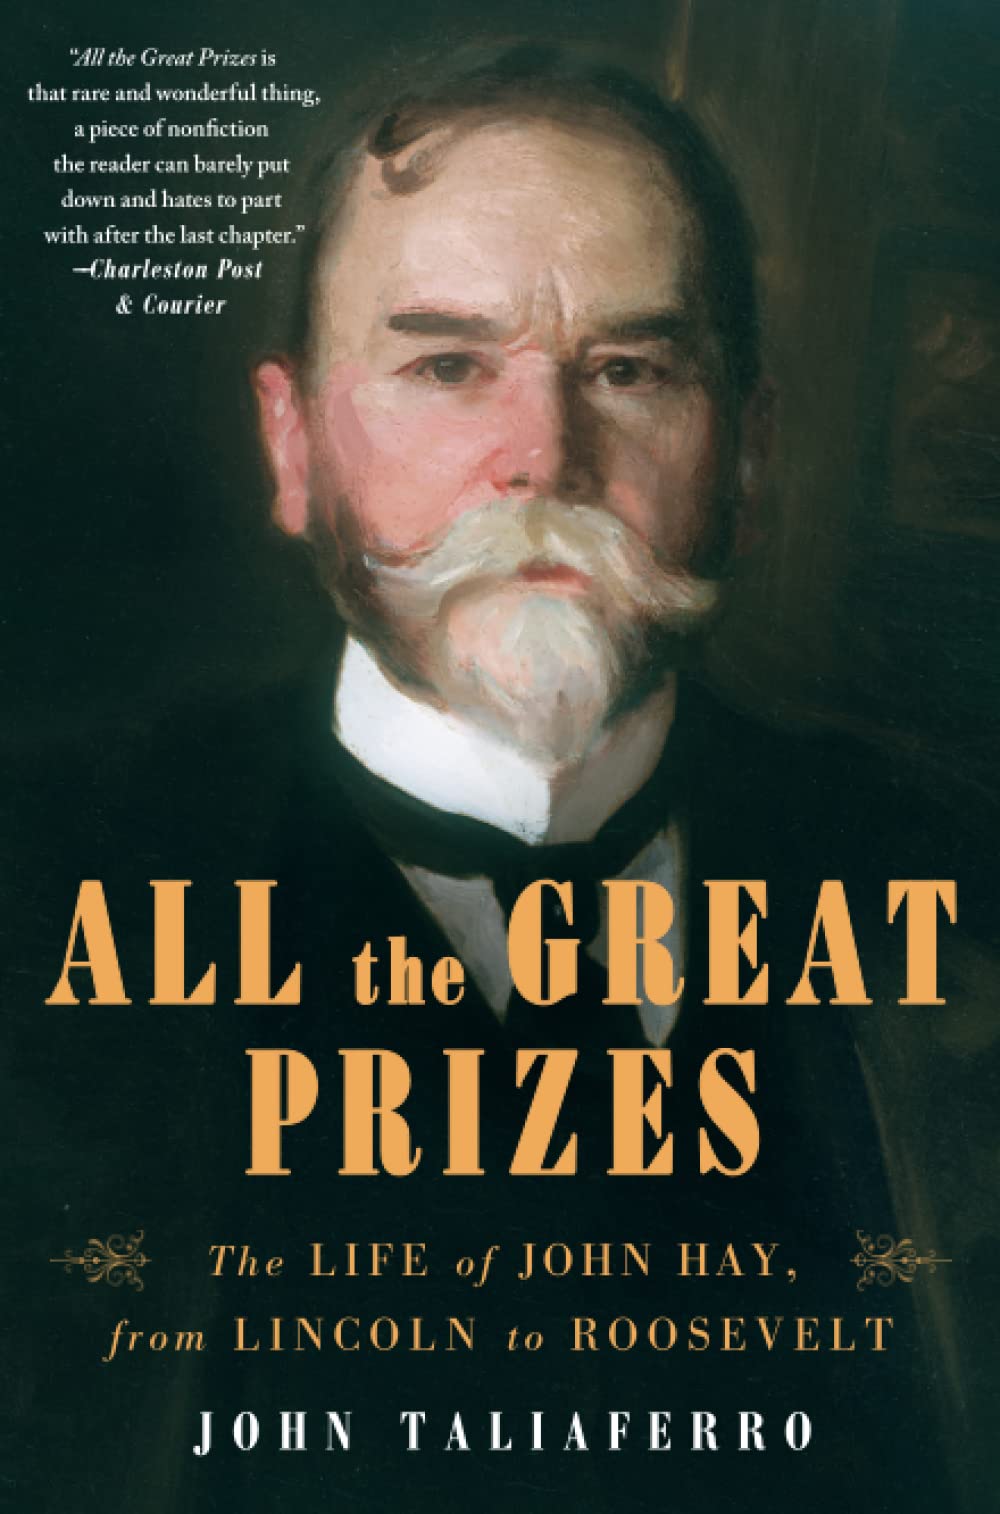 All the great prizes (Hardcover, 2013, Simon & Schuster)